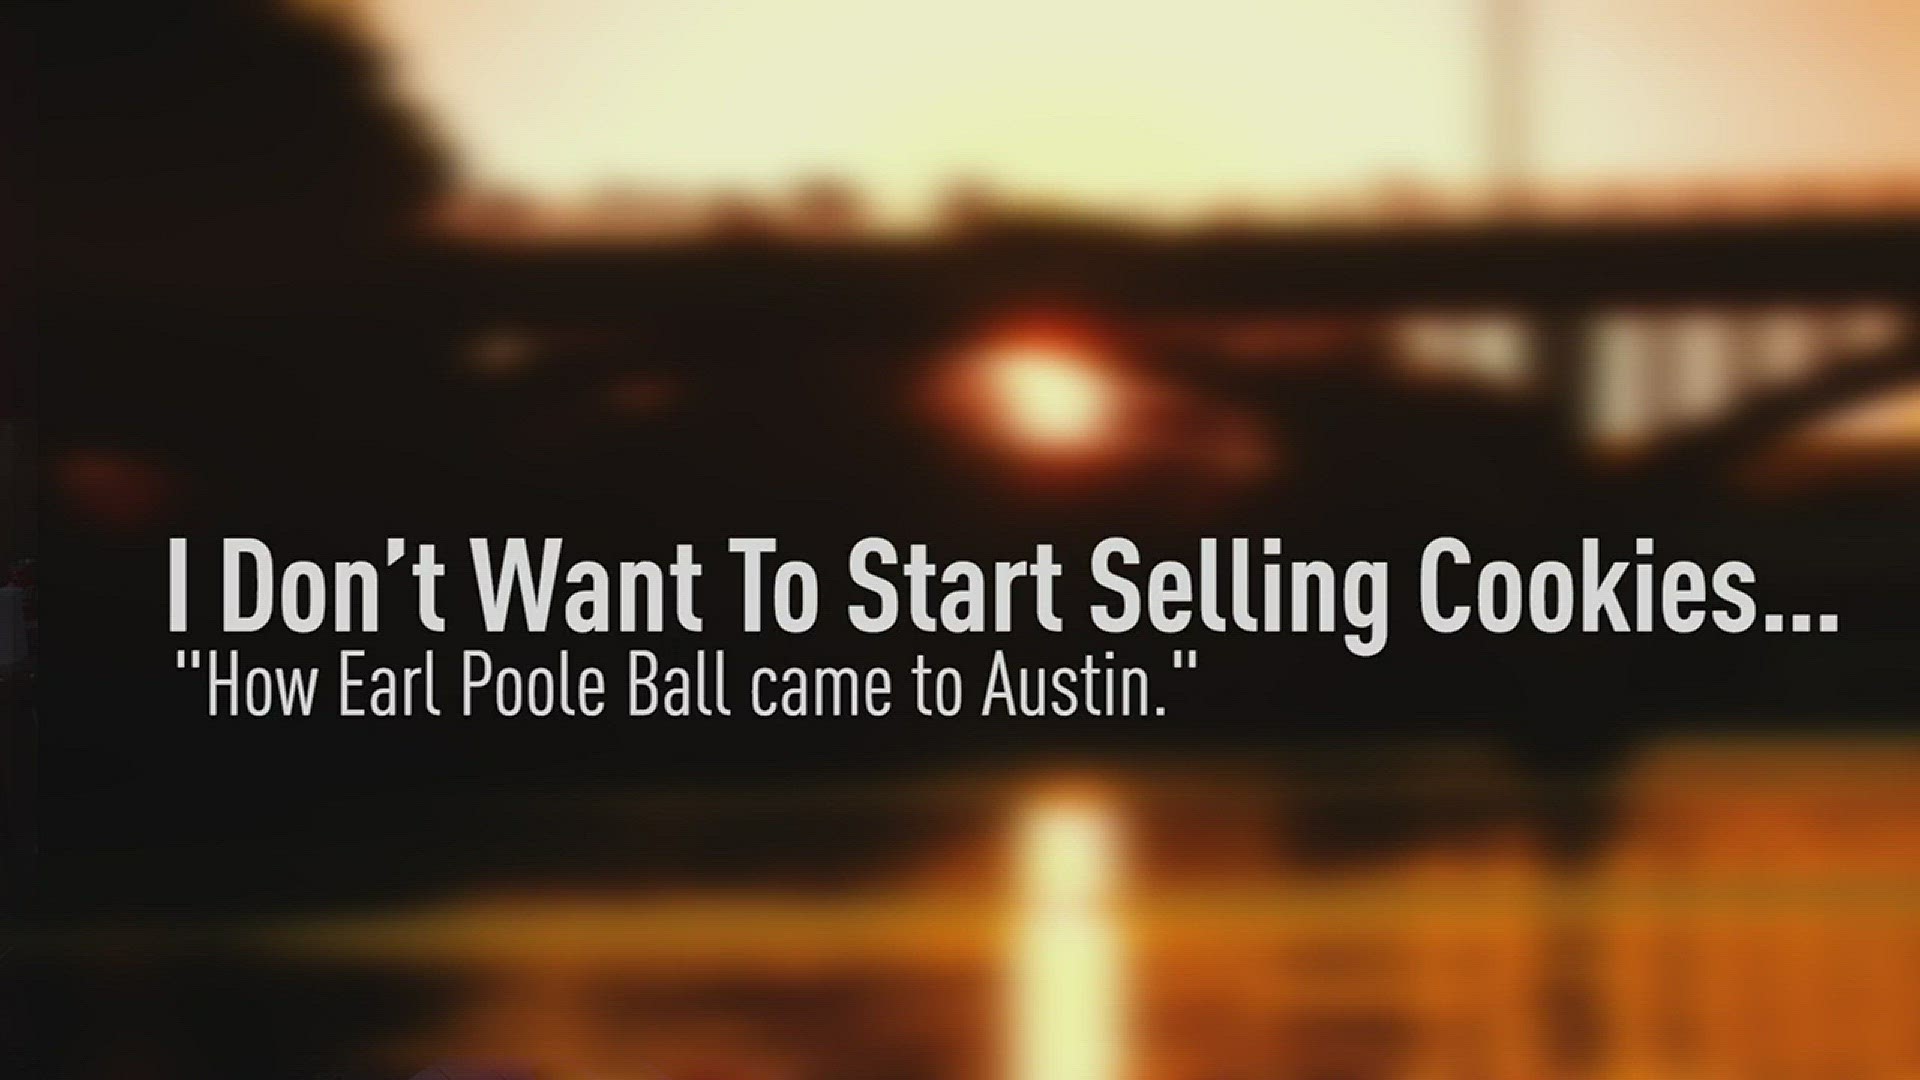 How music legend, Earl Poole Ball came to Austin.